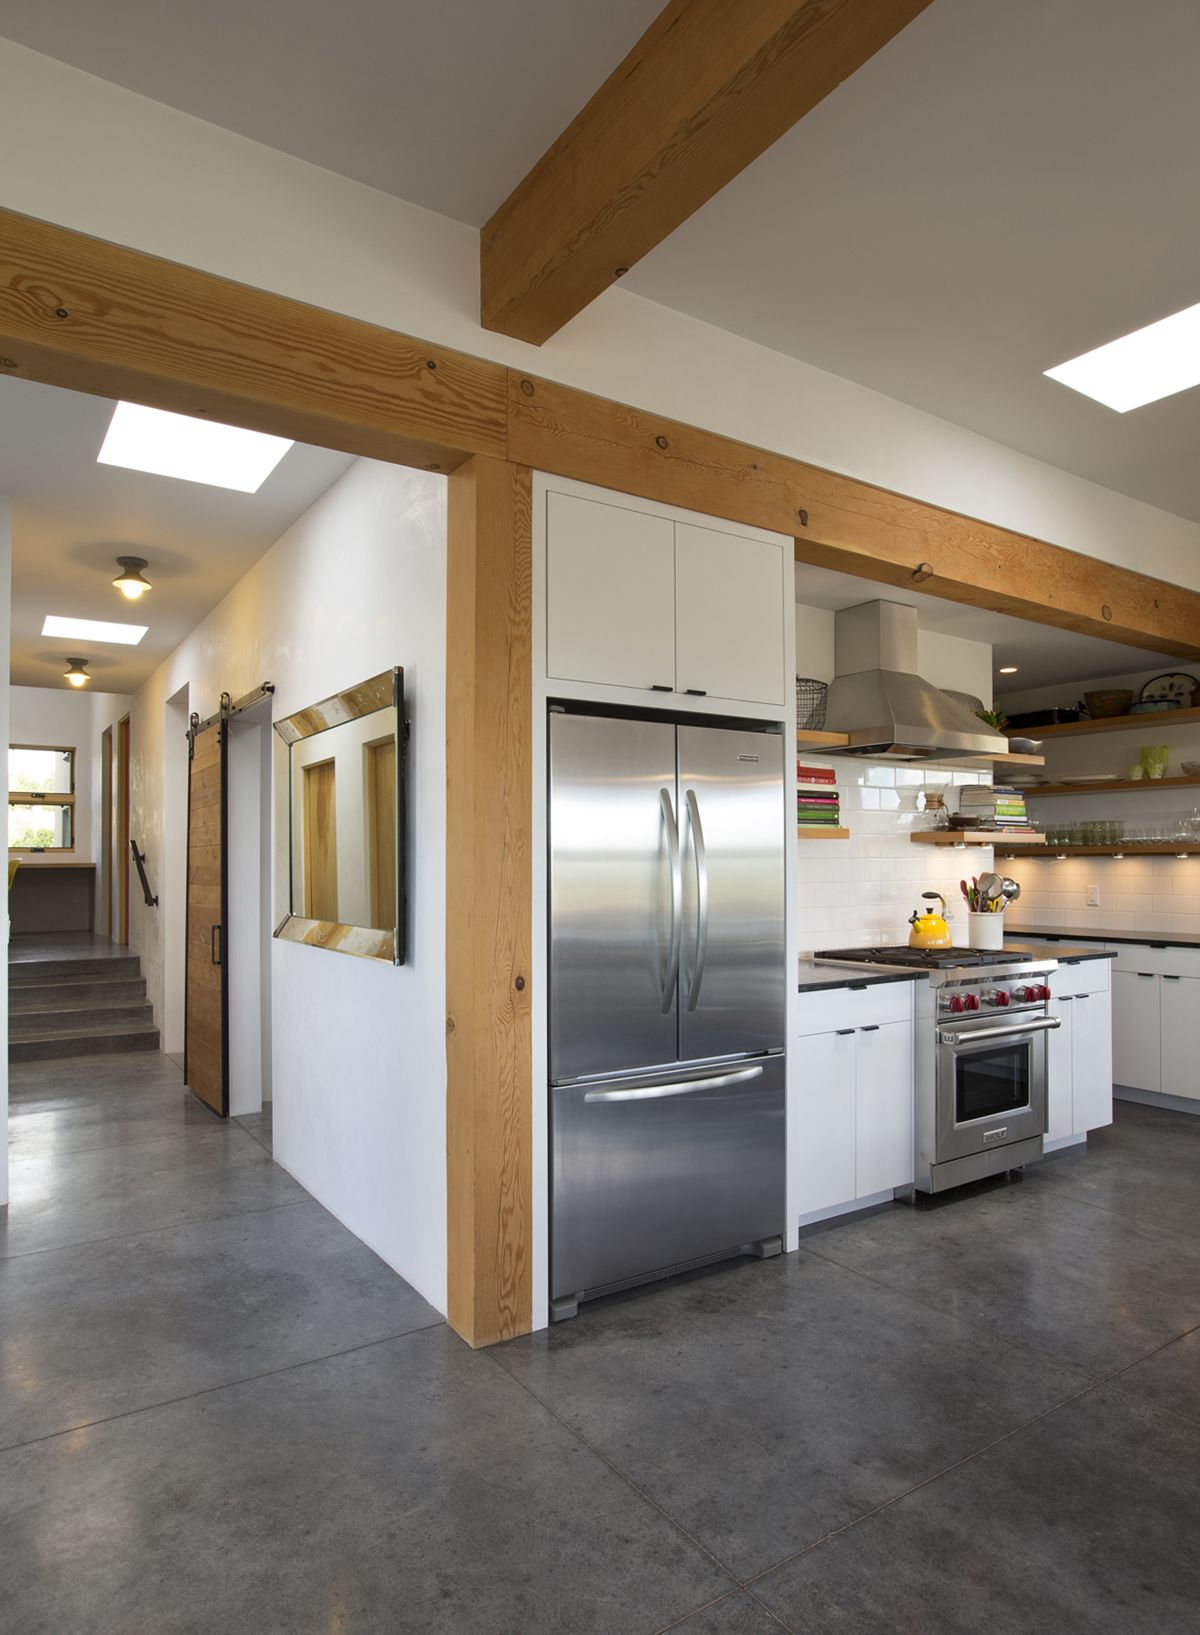 A kitchen with a stainless steel refrigerator designed by a home designer or home builder.